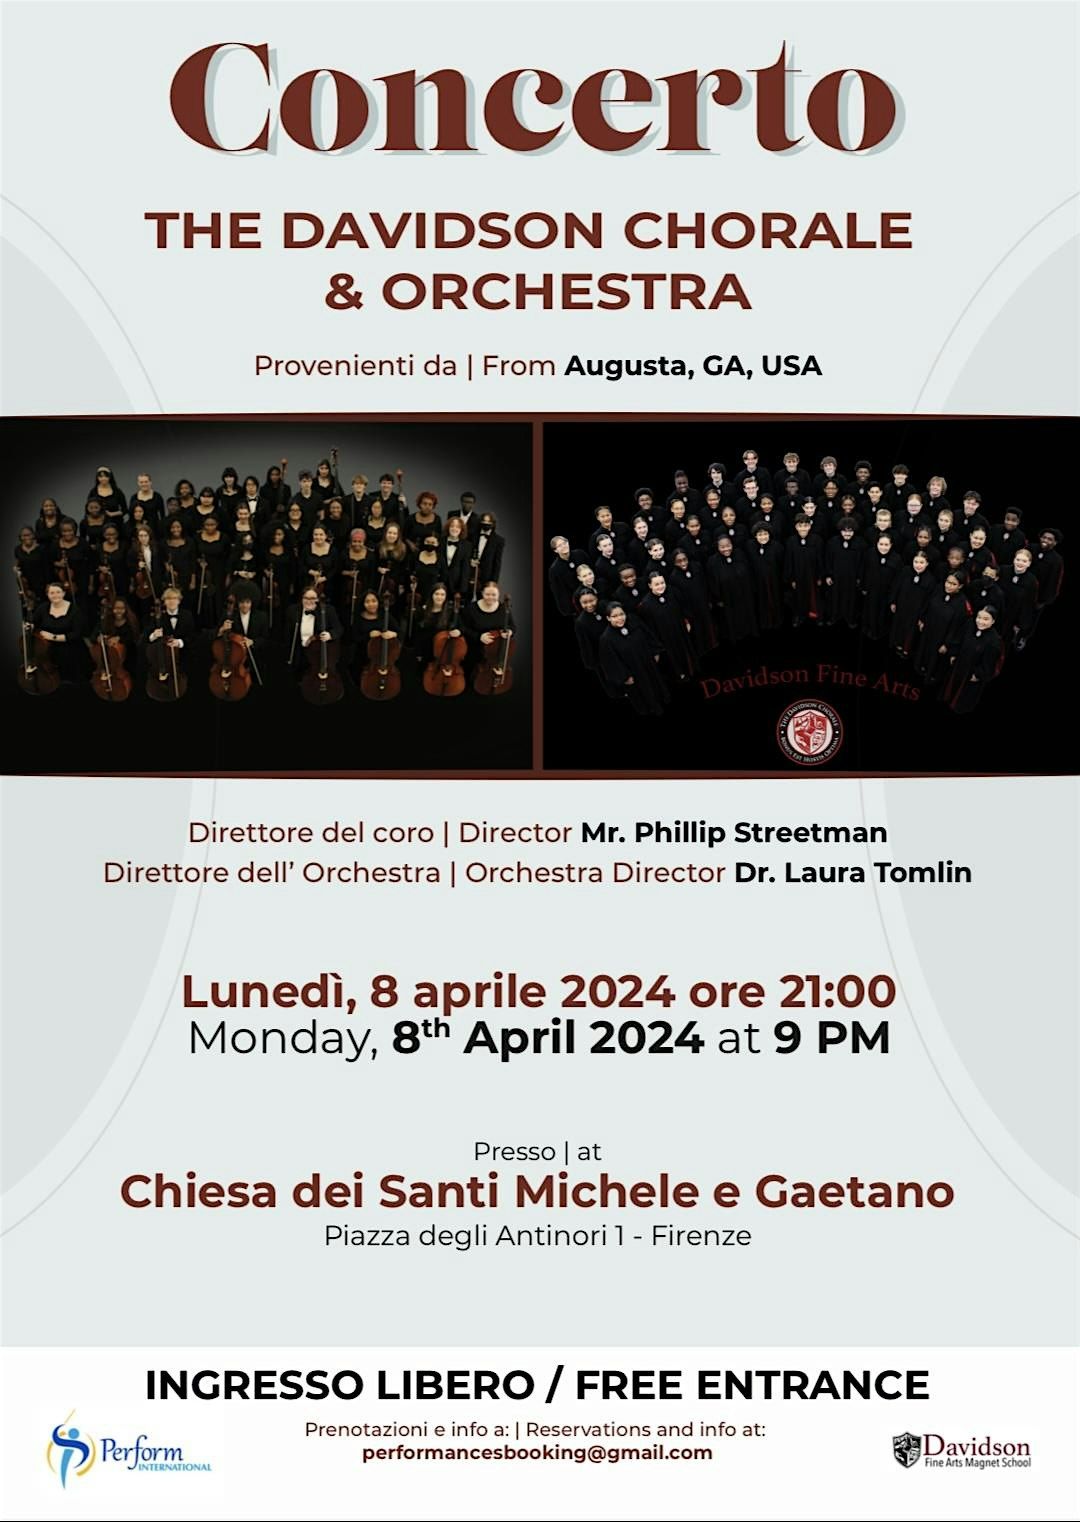 FREE CONCERT ROMA - The Davidson Chorale & Orchestra